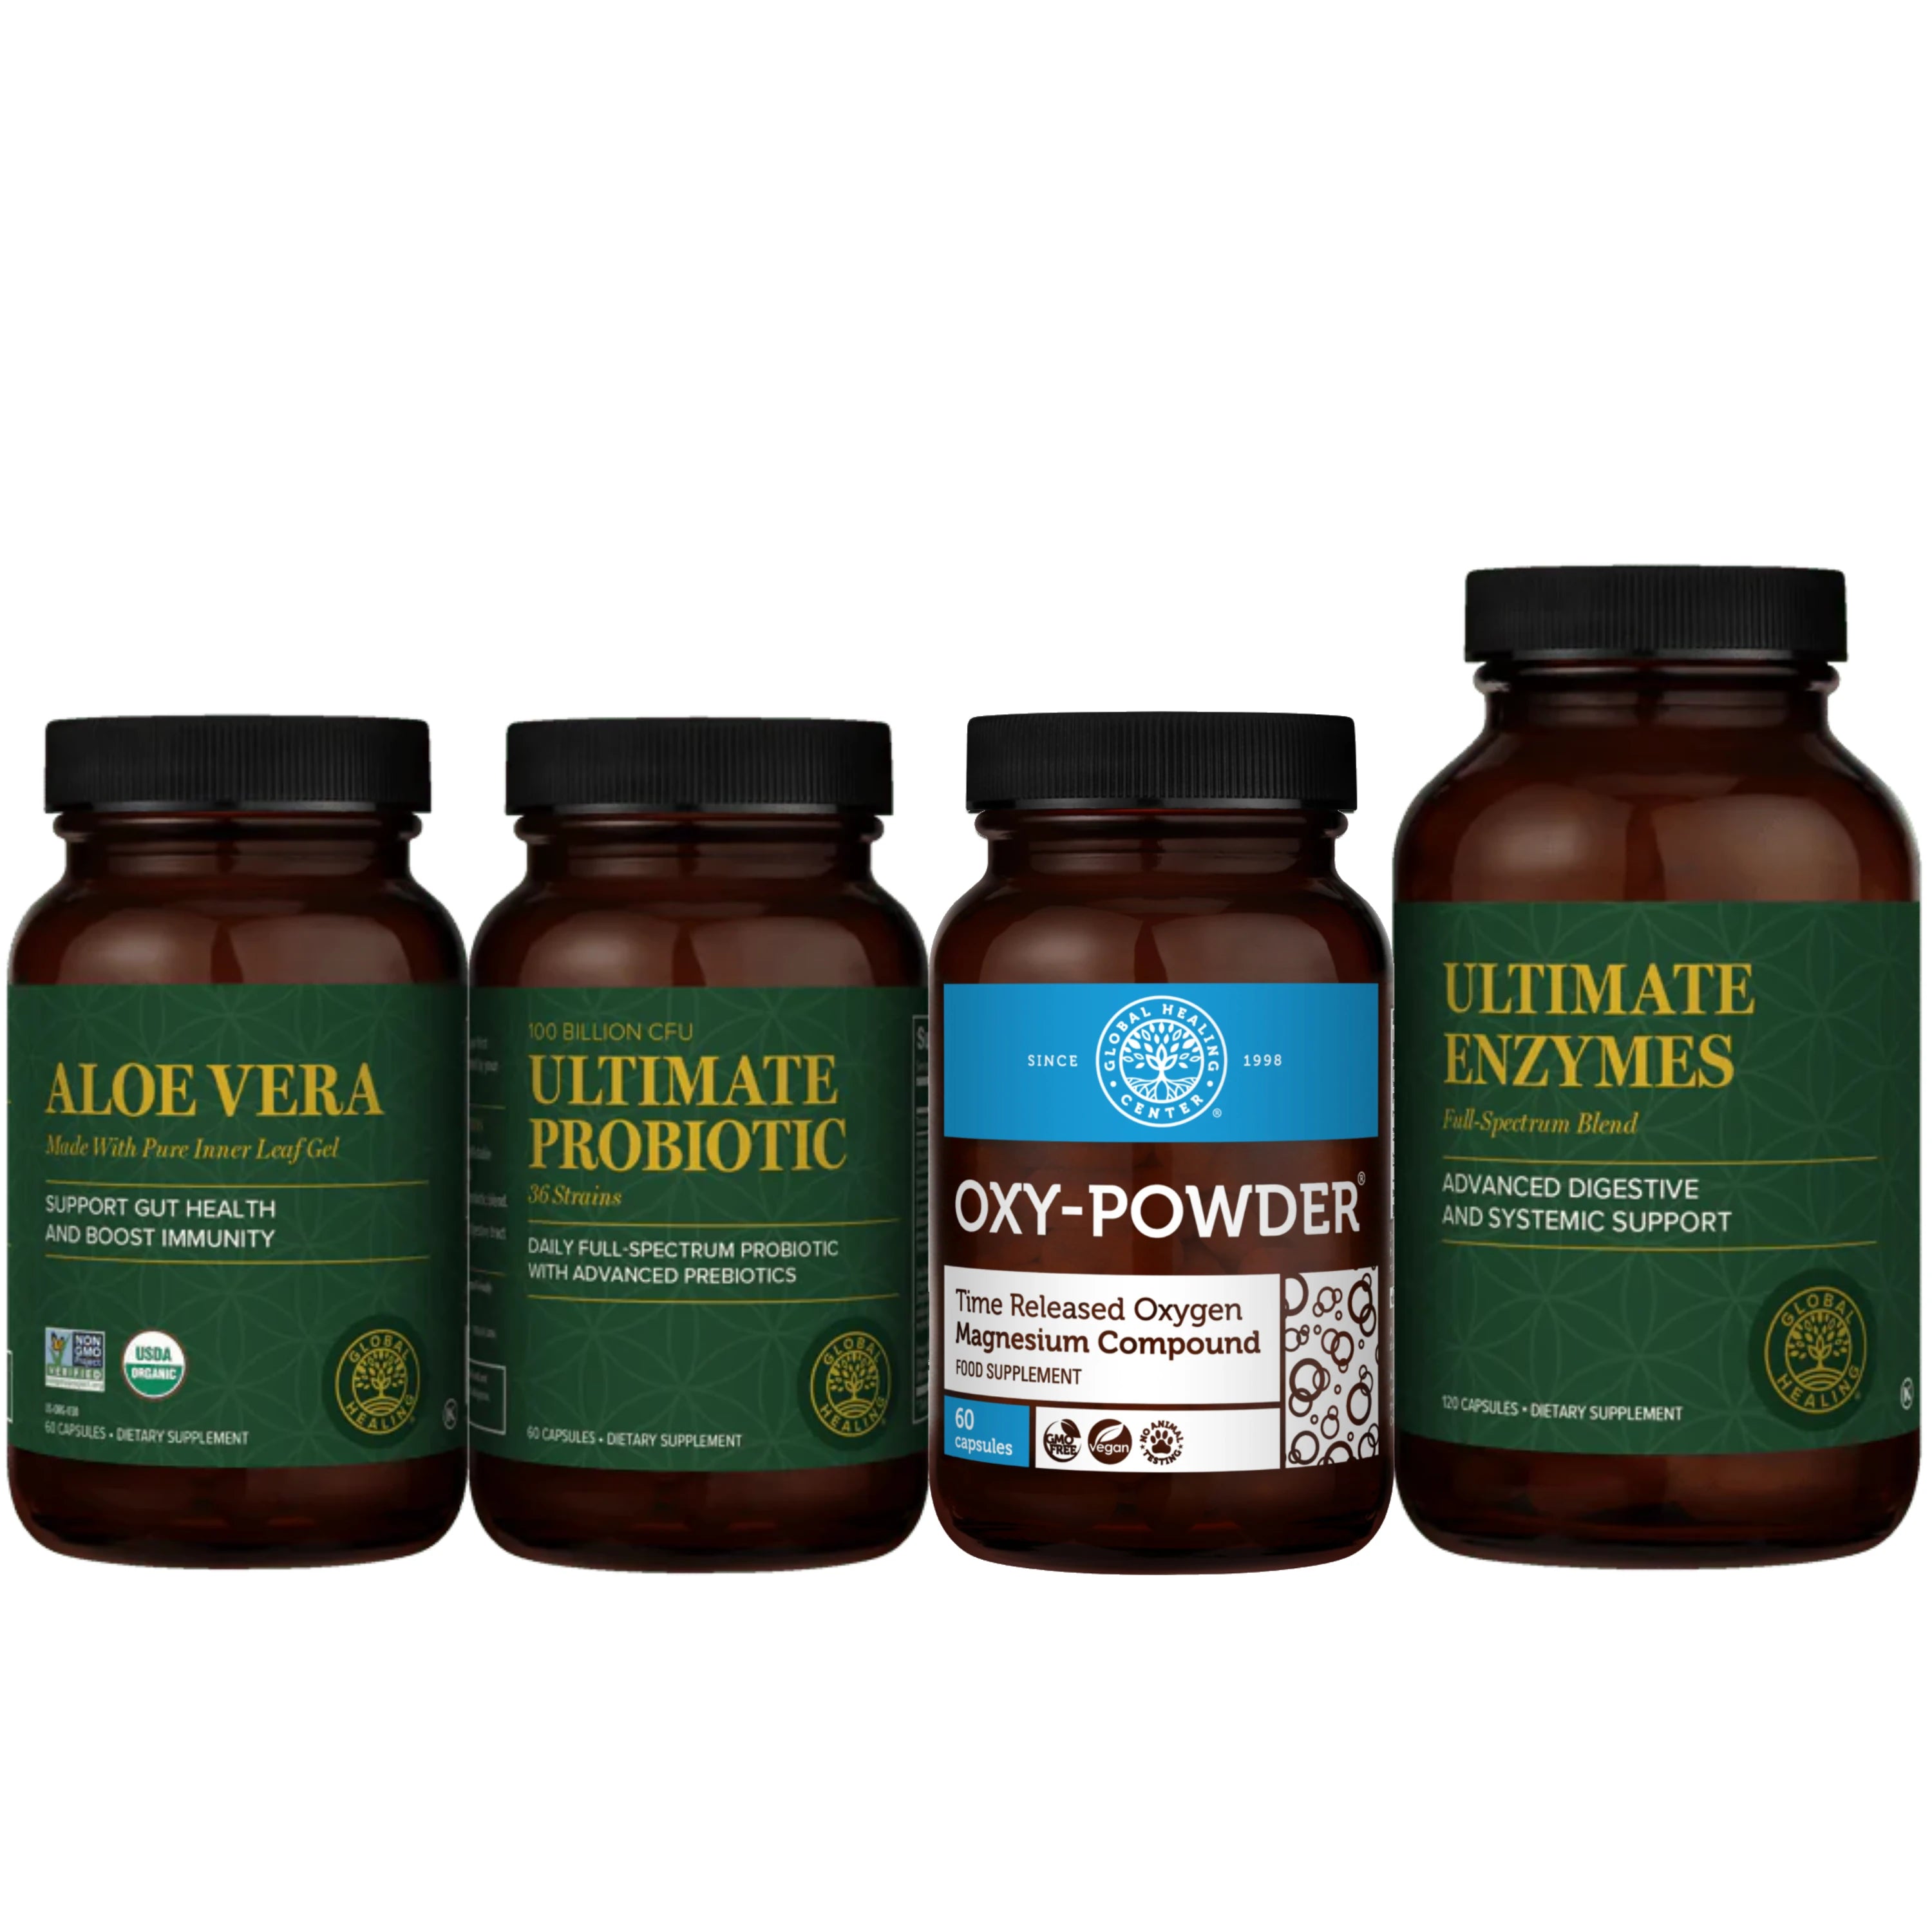 Global Healing Gut Health Bundle, with Aloe vera, Ultimate Probiotic, Oxy-powder and Ultimate Enzymes